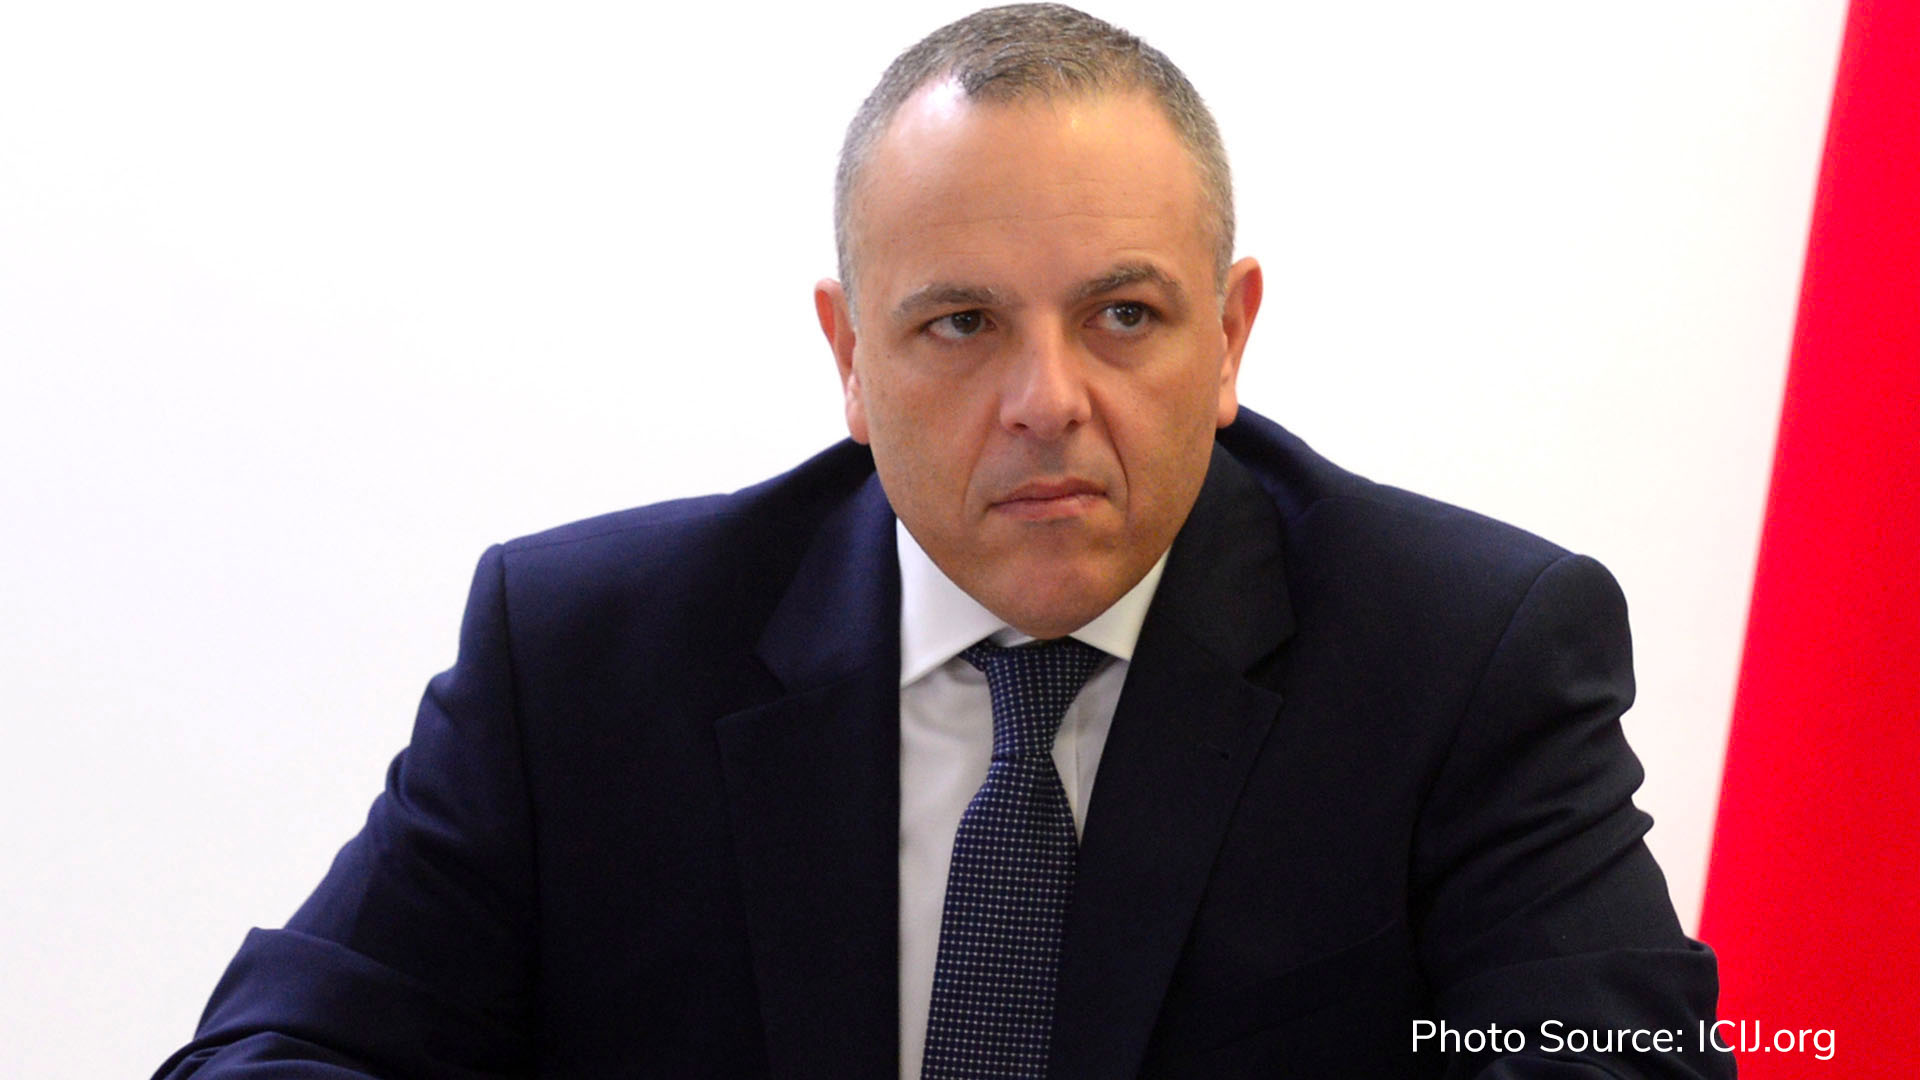 Breaking: Keith Schembri granted bail